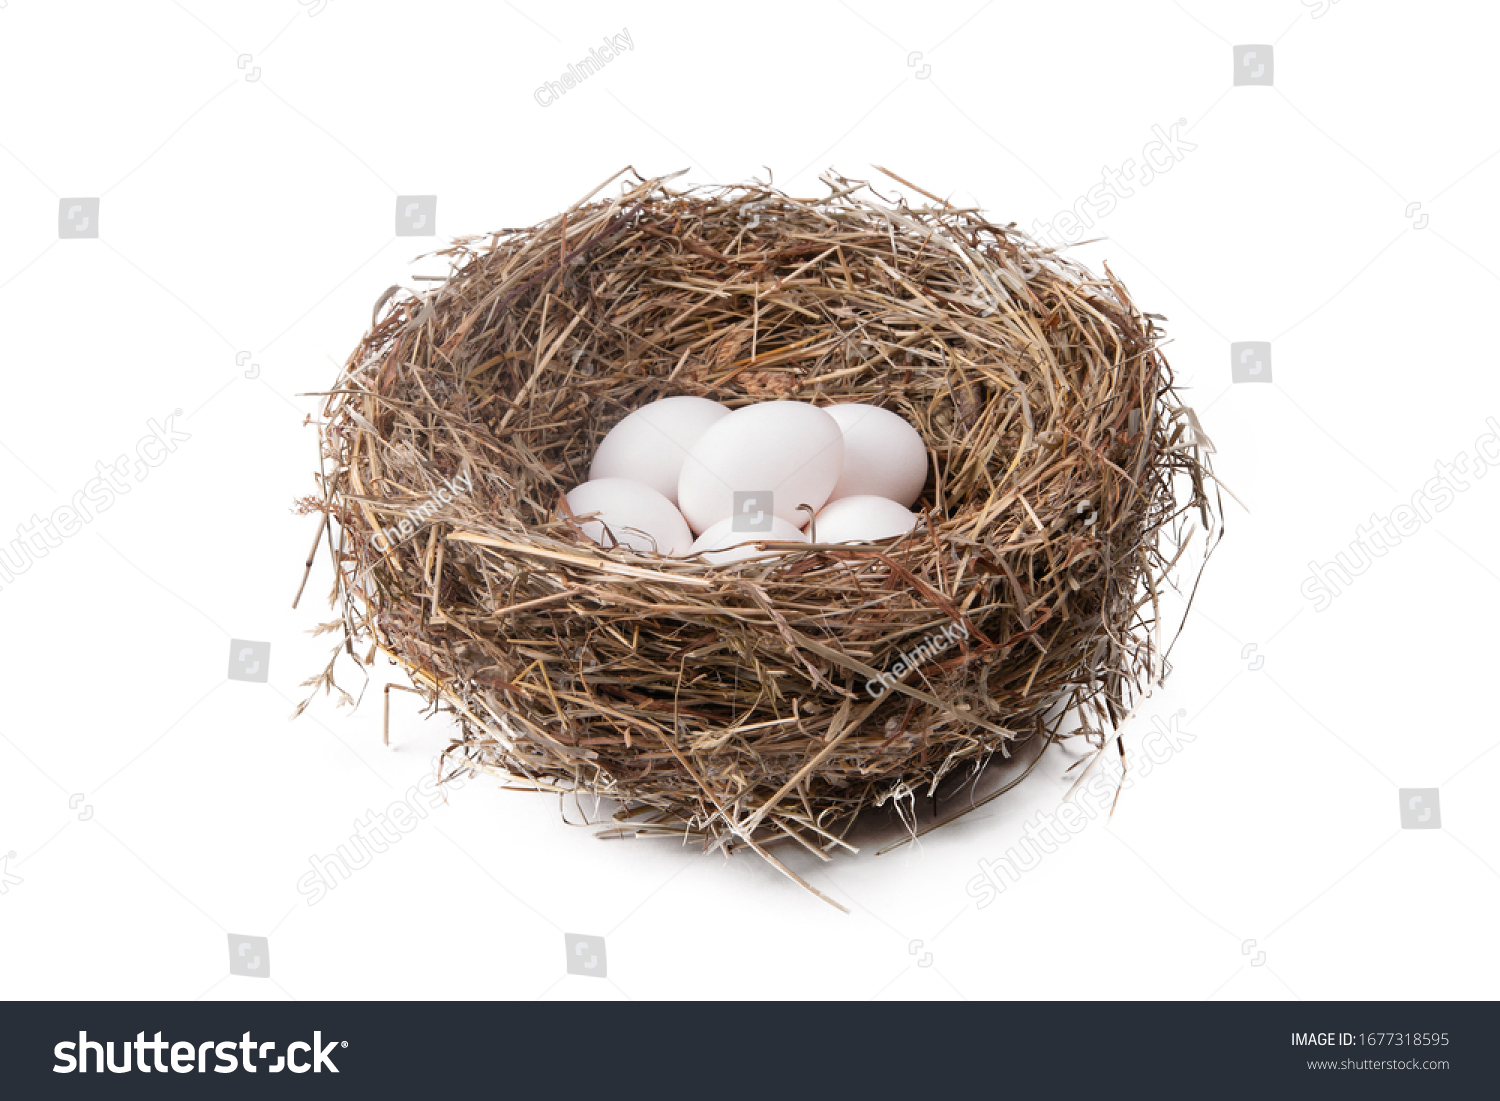 Heap of white eggs in a straw nest on a white background #1677318595